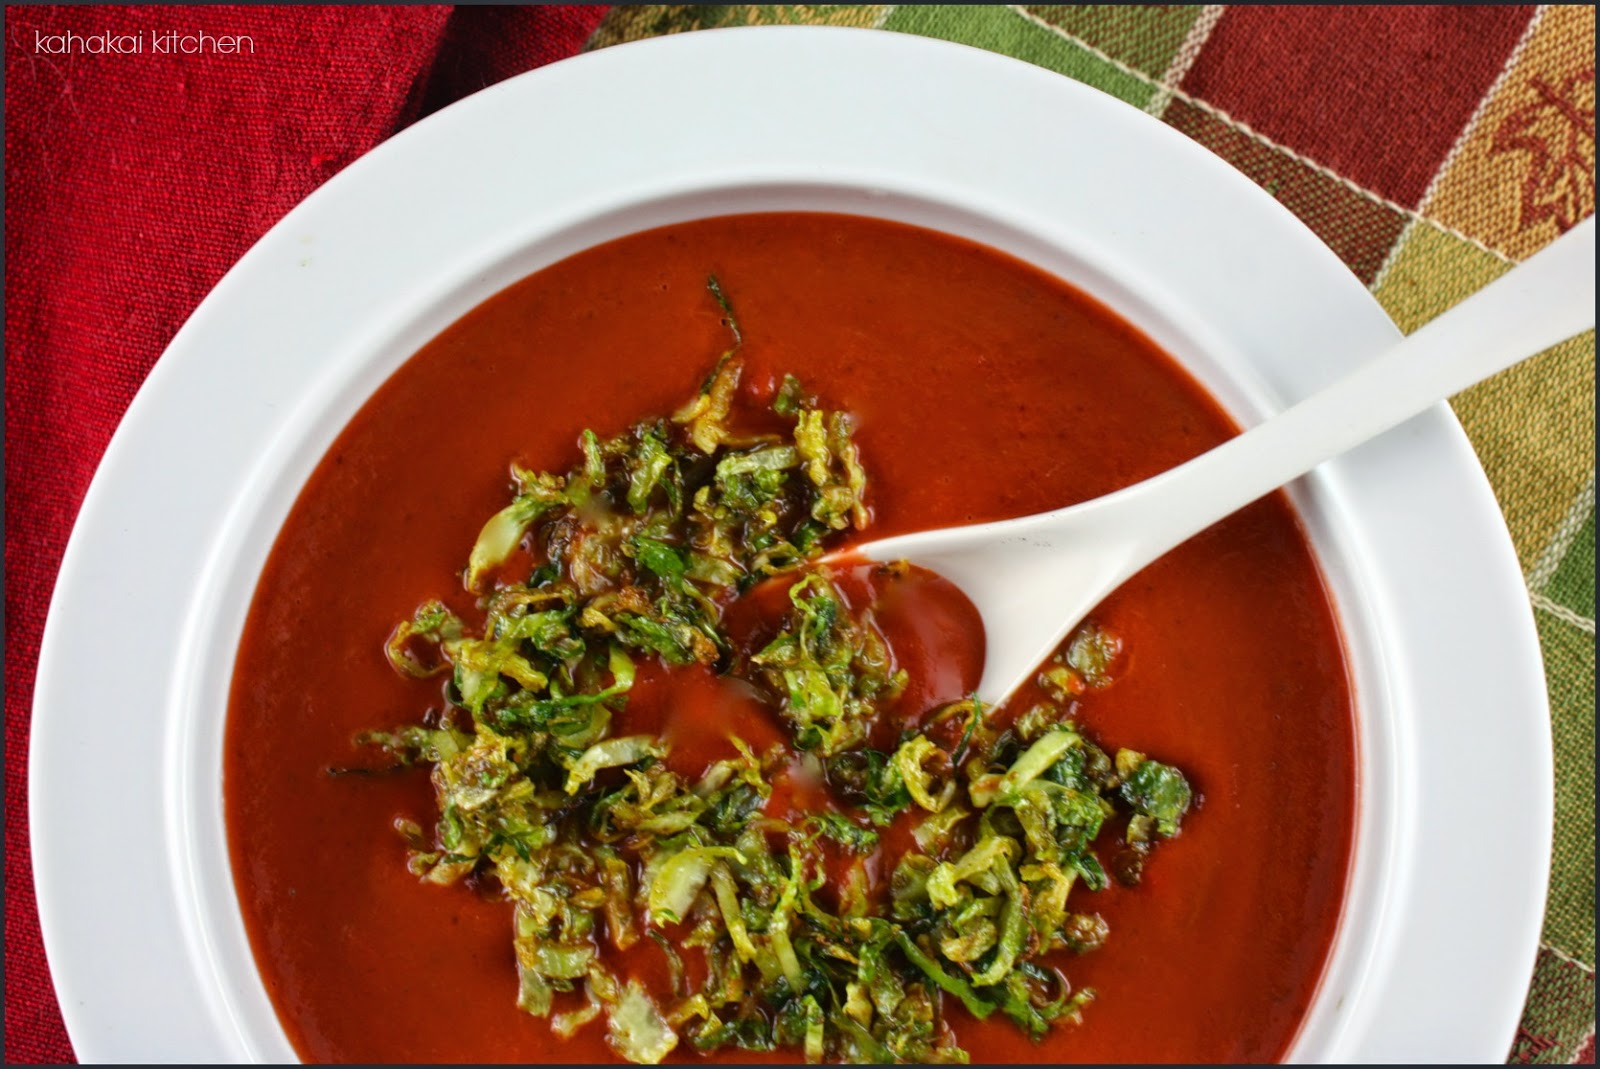 Kahakai Kitchen: Giada's Cranberry Soup with Curried Shredded Brussels ...